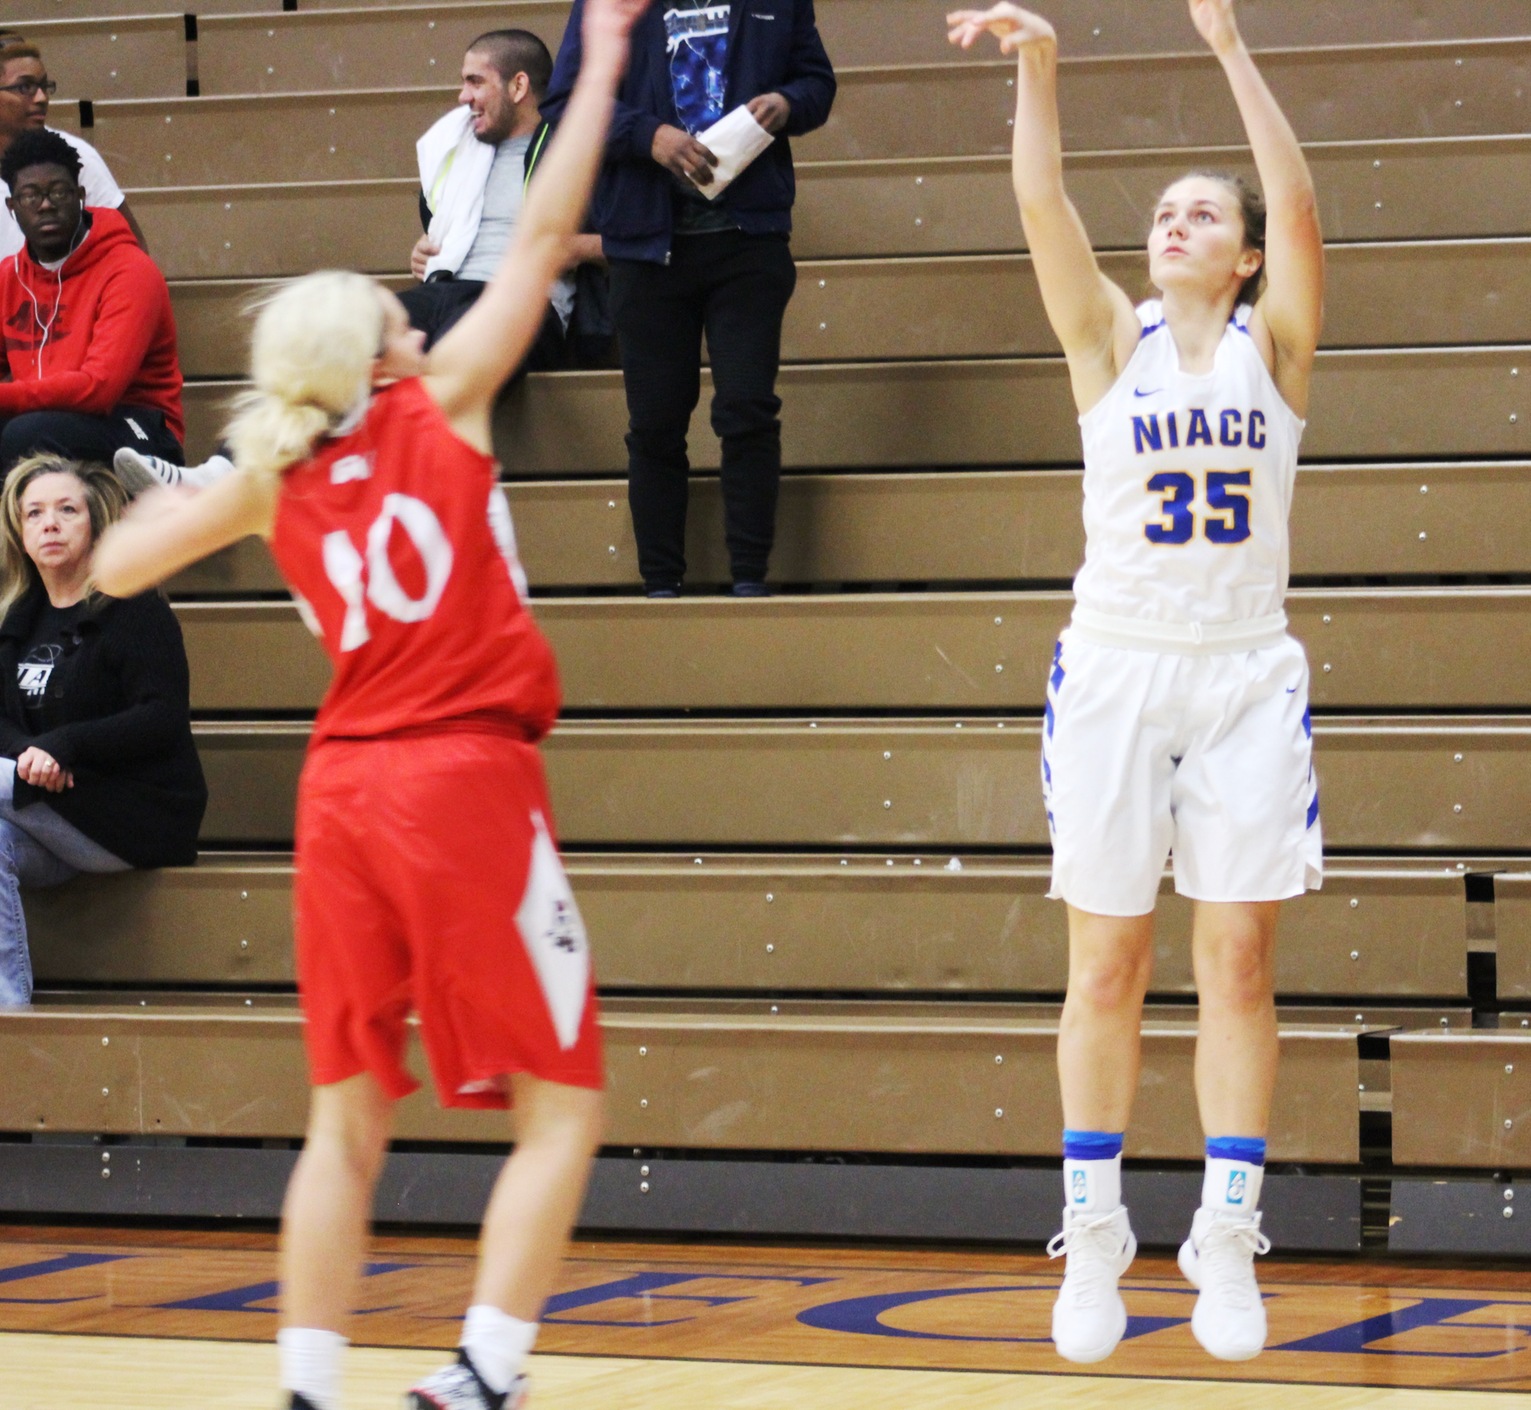 Kelsie Willert connects on a 3-point goal in the second half of Sunday's game against the Grand View Junior Varsity.